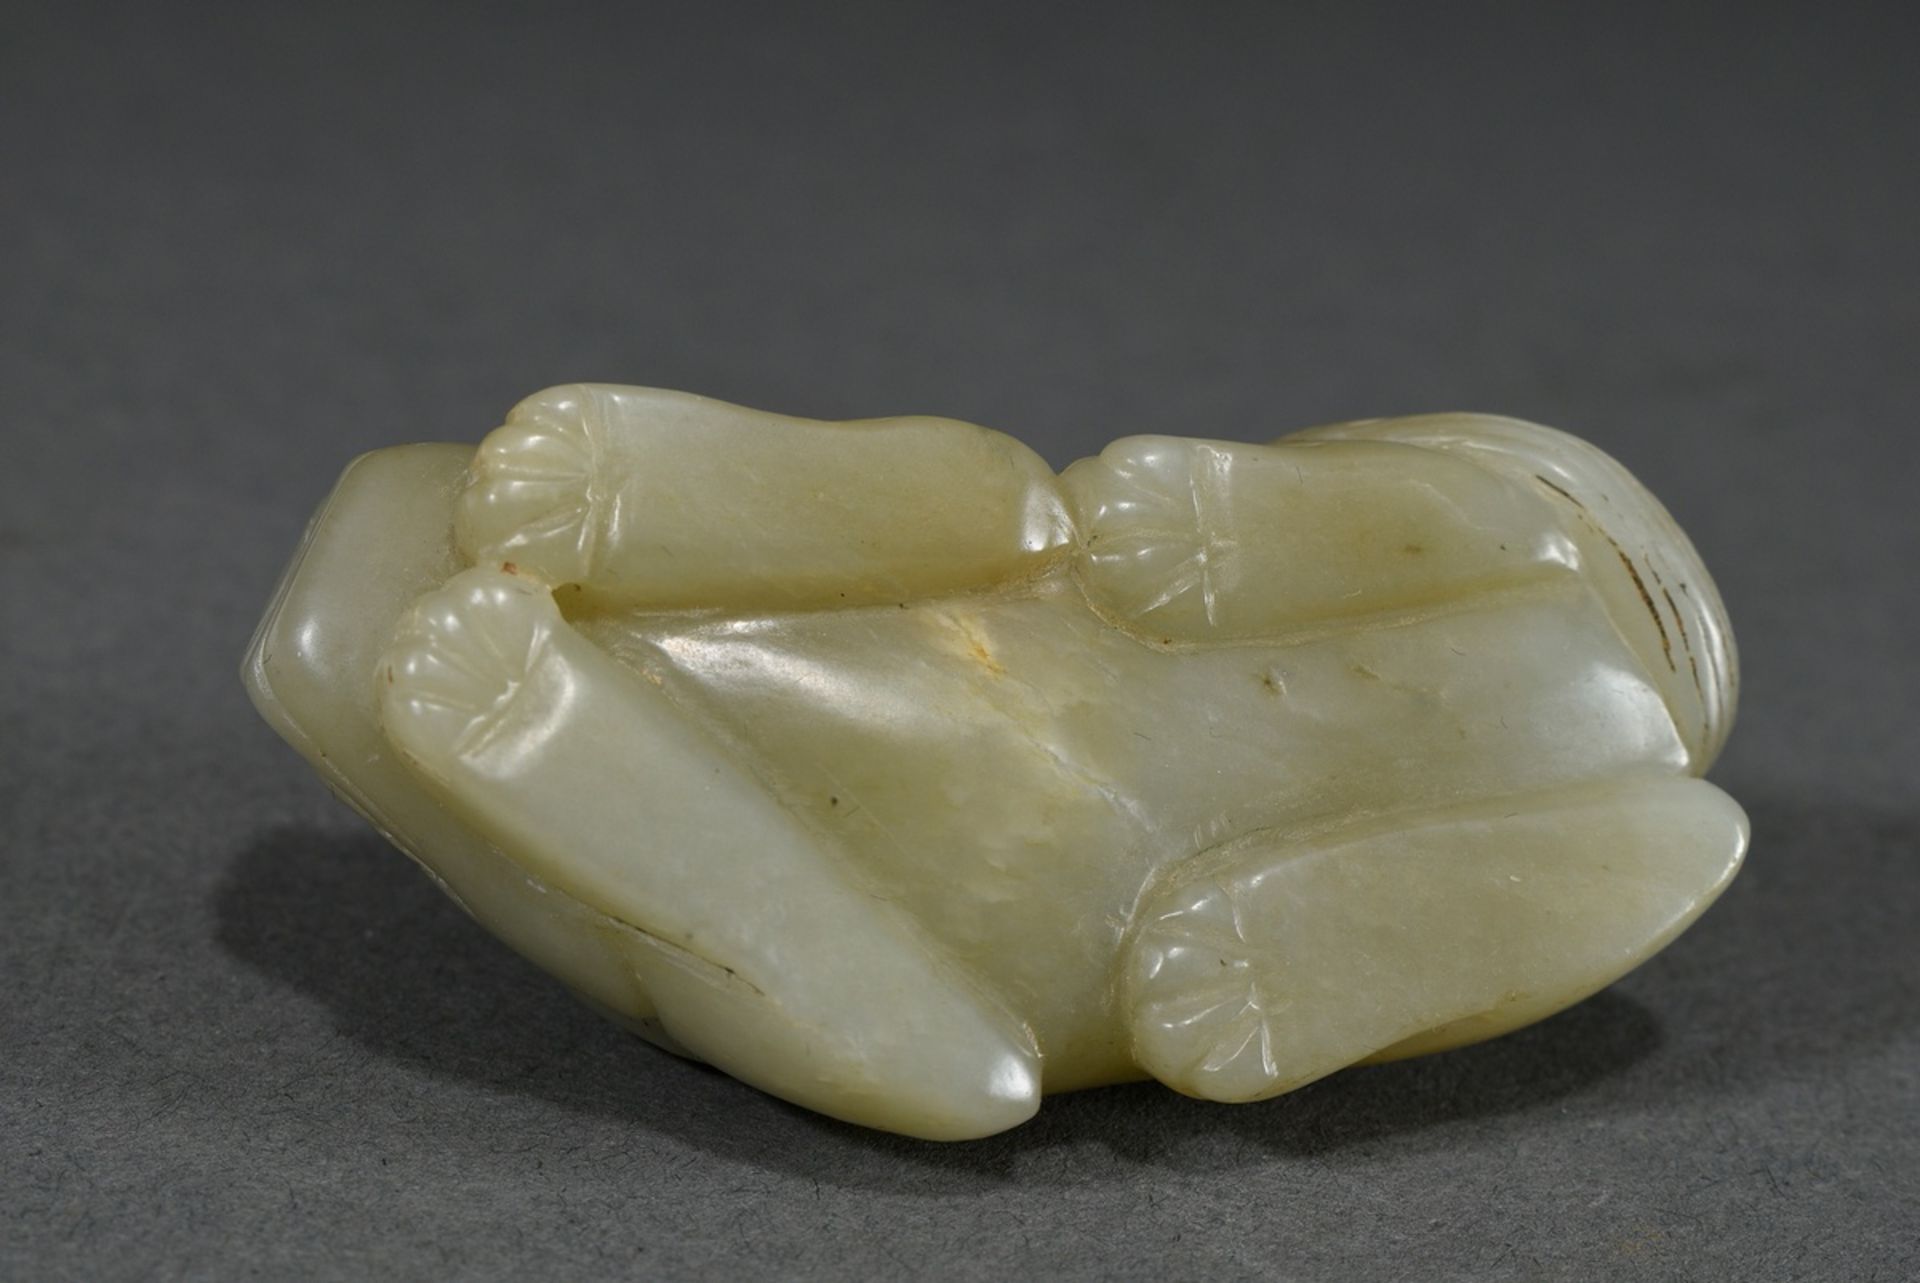 Fine celadon jade figure "Reclining Qilin" in Song style, China, l. 6cm - Image 4 of 4